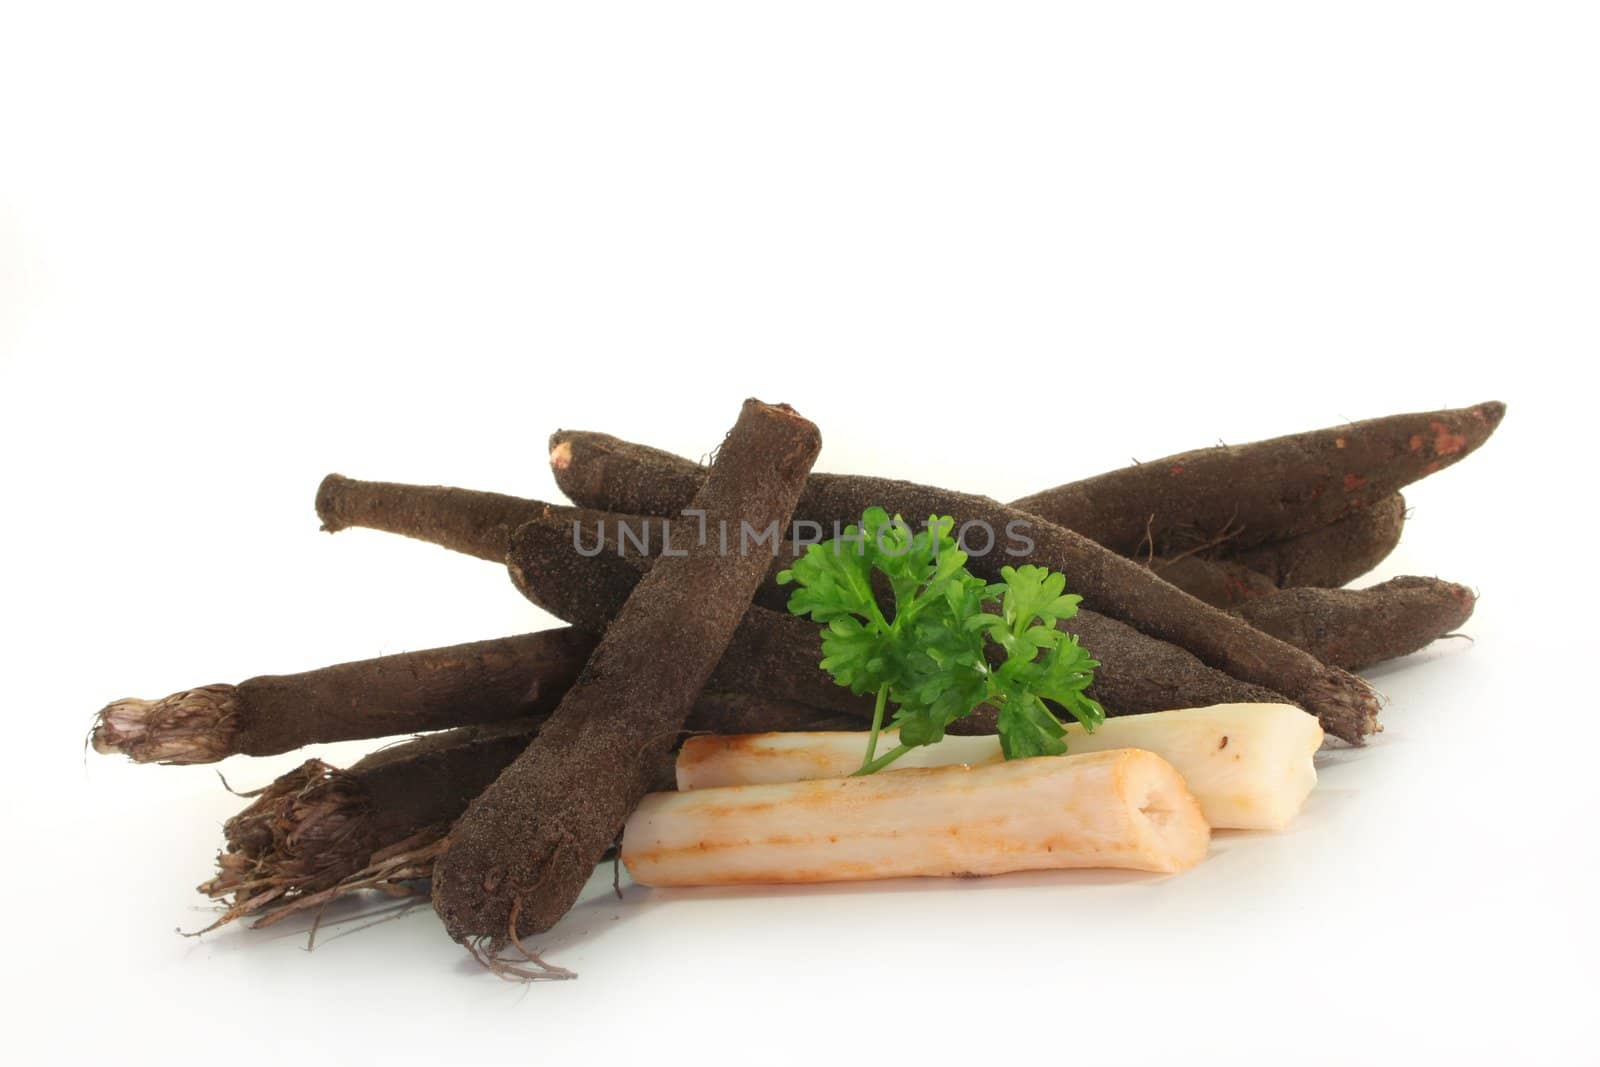 Salsify and parsley on a white background
